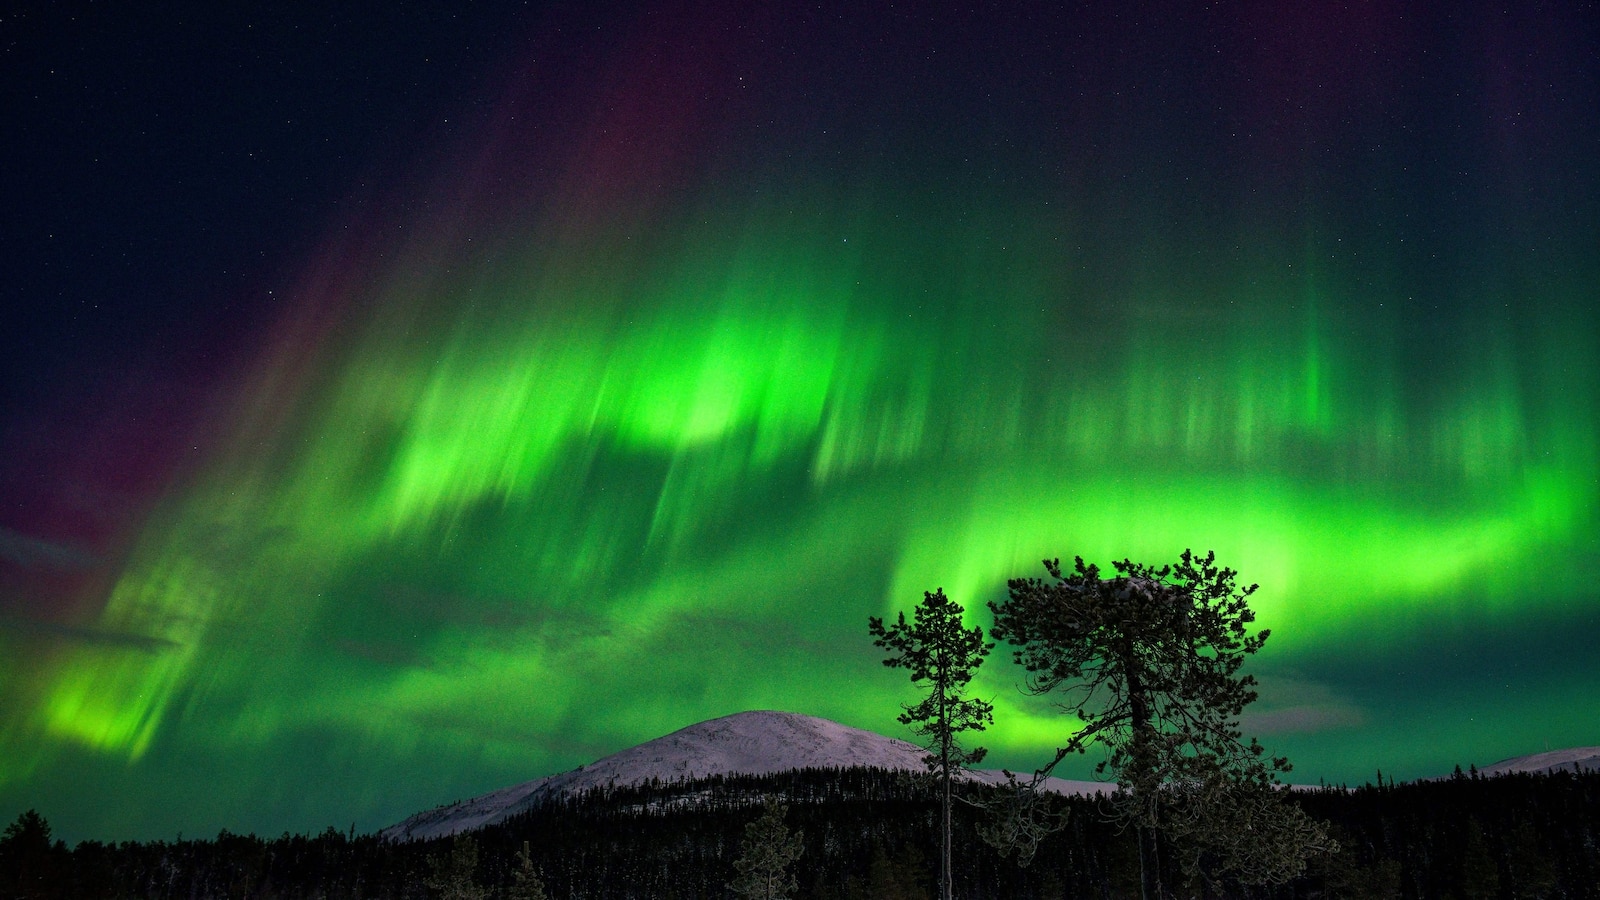 Northern lights could be seen as far south as Alabama this weekend: NOAA [Video]